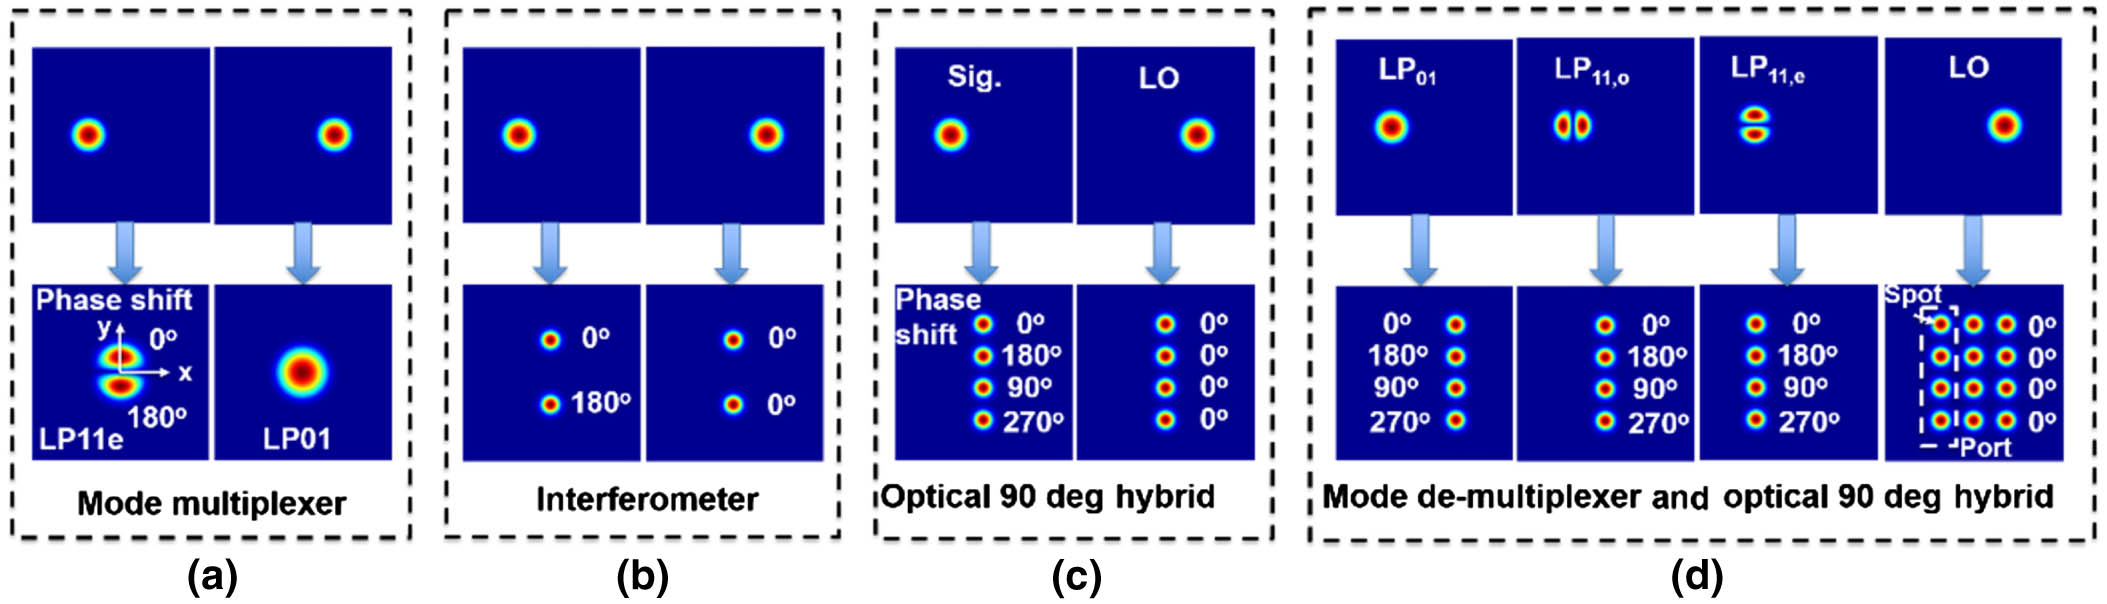 Illustration of input-to-output mapping for MPLC-based devices. (a) Mode multiplexer converting two separated input beams into two overlapped orthogonal beams; (b) interferometrically combining two separated input beams; (c) optical 90-deg hybrid mixing of two separated input beams; (d) mode demultiplexer and optical 90-deg hybrid separating and converting orthogonal overlapped modes and mixing with their respective local oscillators. The phase retardations of the spots are marked alongside them.